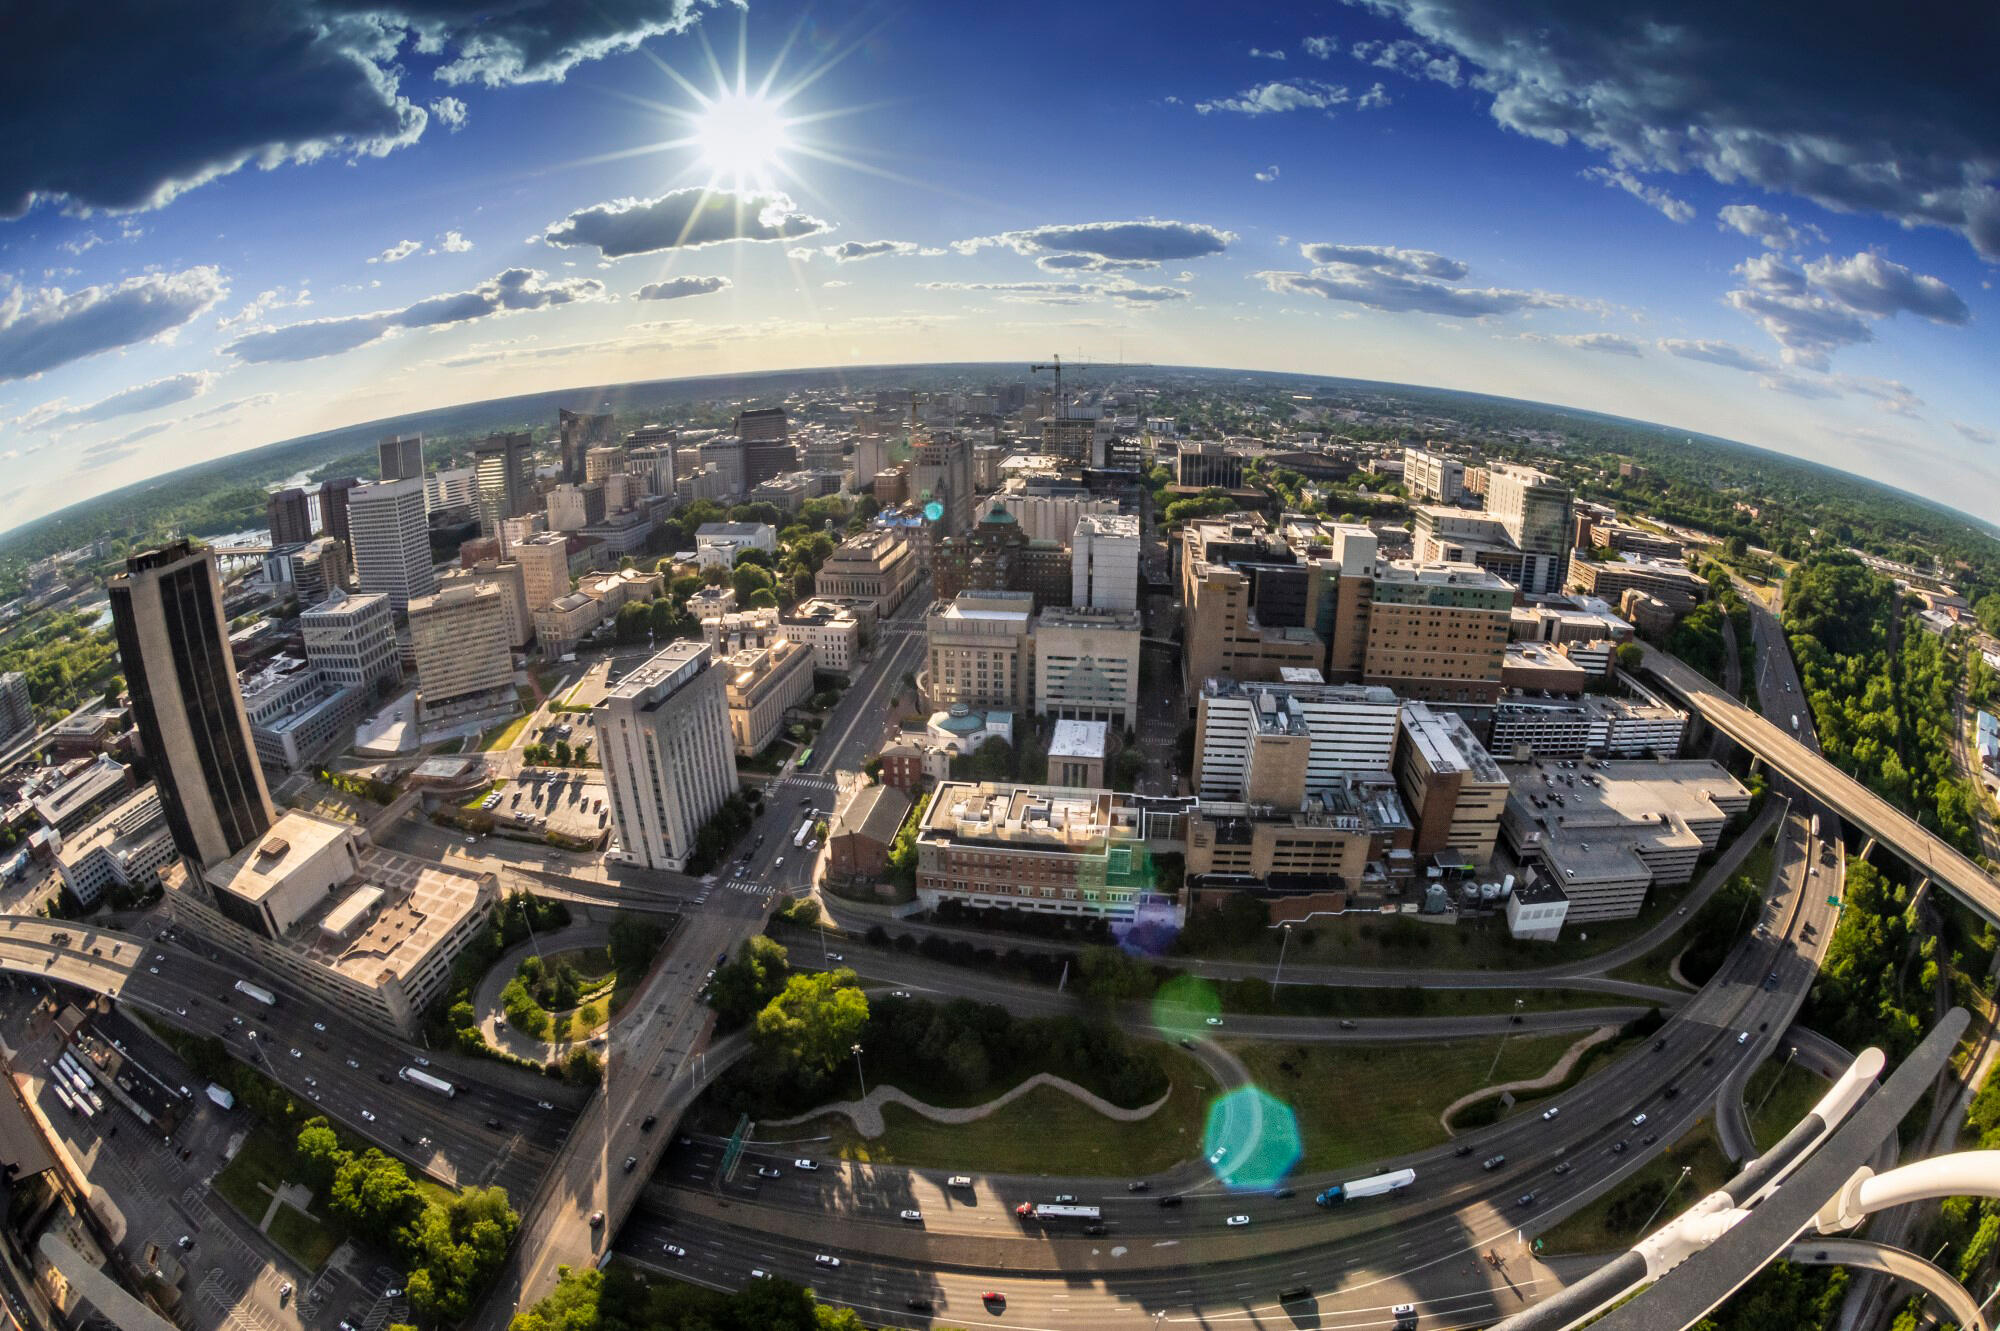 An aerial image of a city skyline, including VCU Health's campus and its surroundings in downtown Richmond.